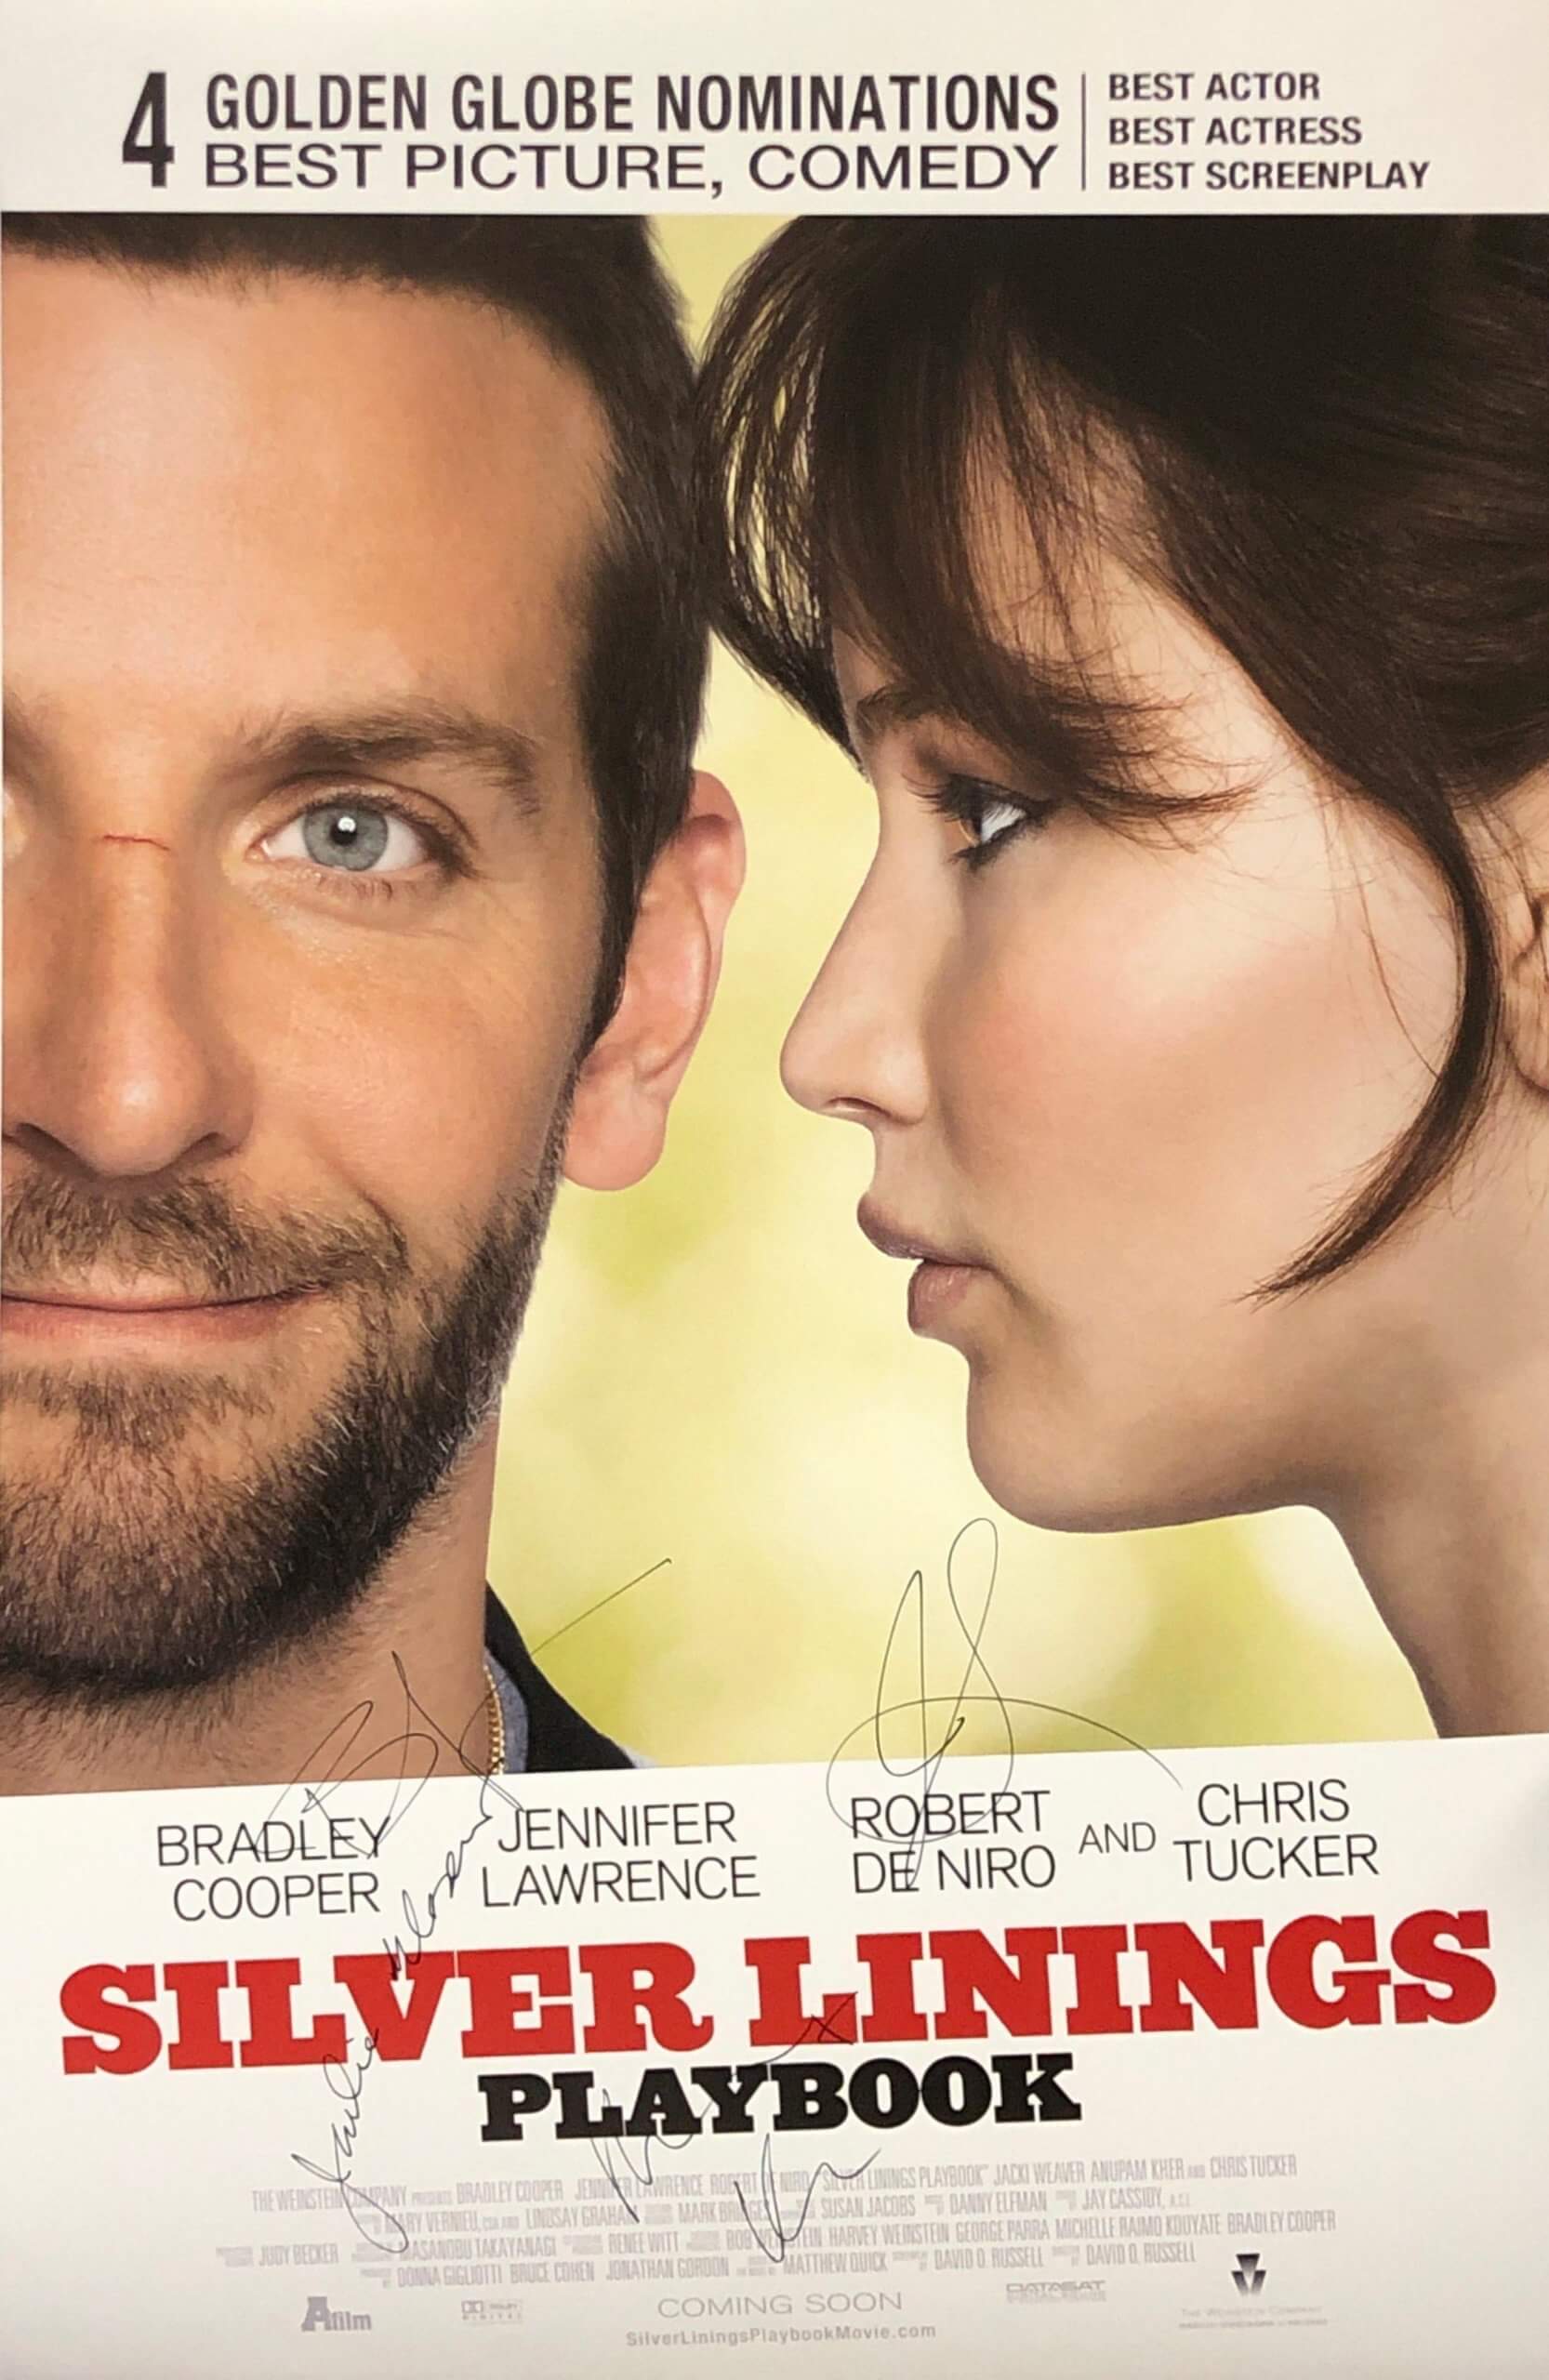 Silver Linings Playbook Autographs For Sale - Presley Collectibles